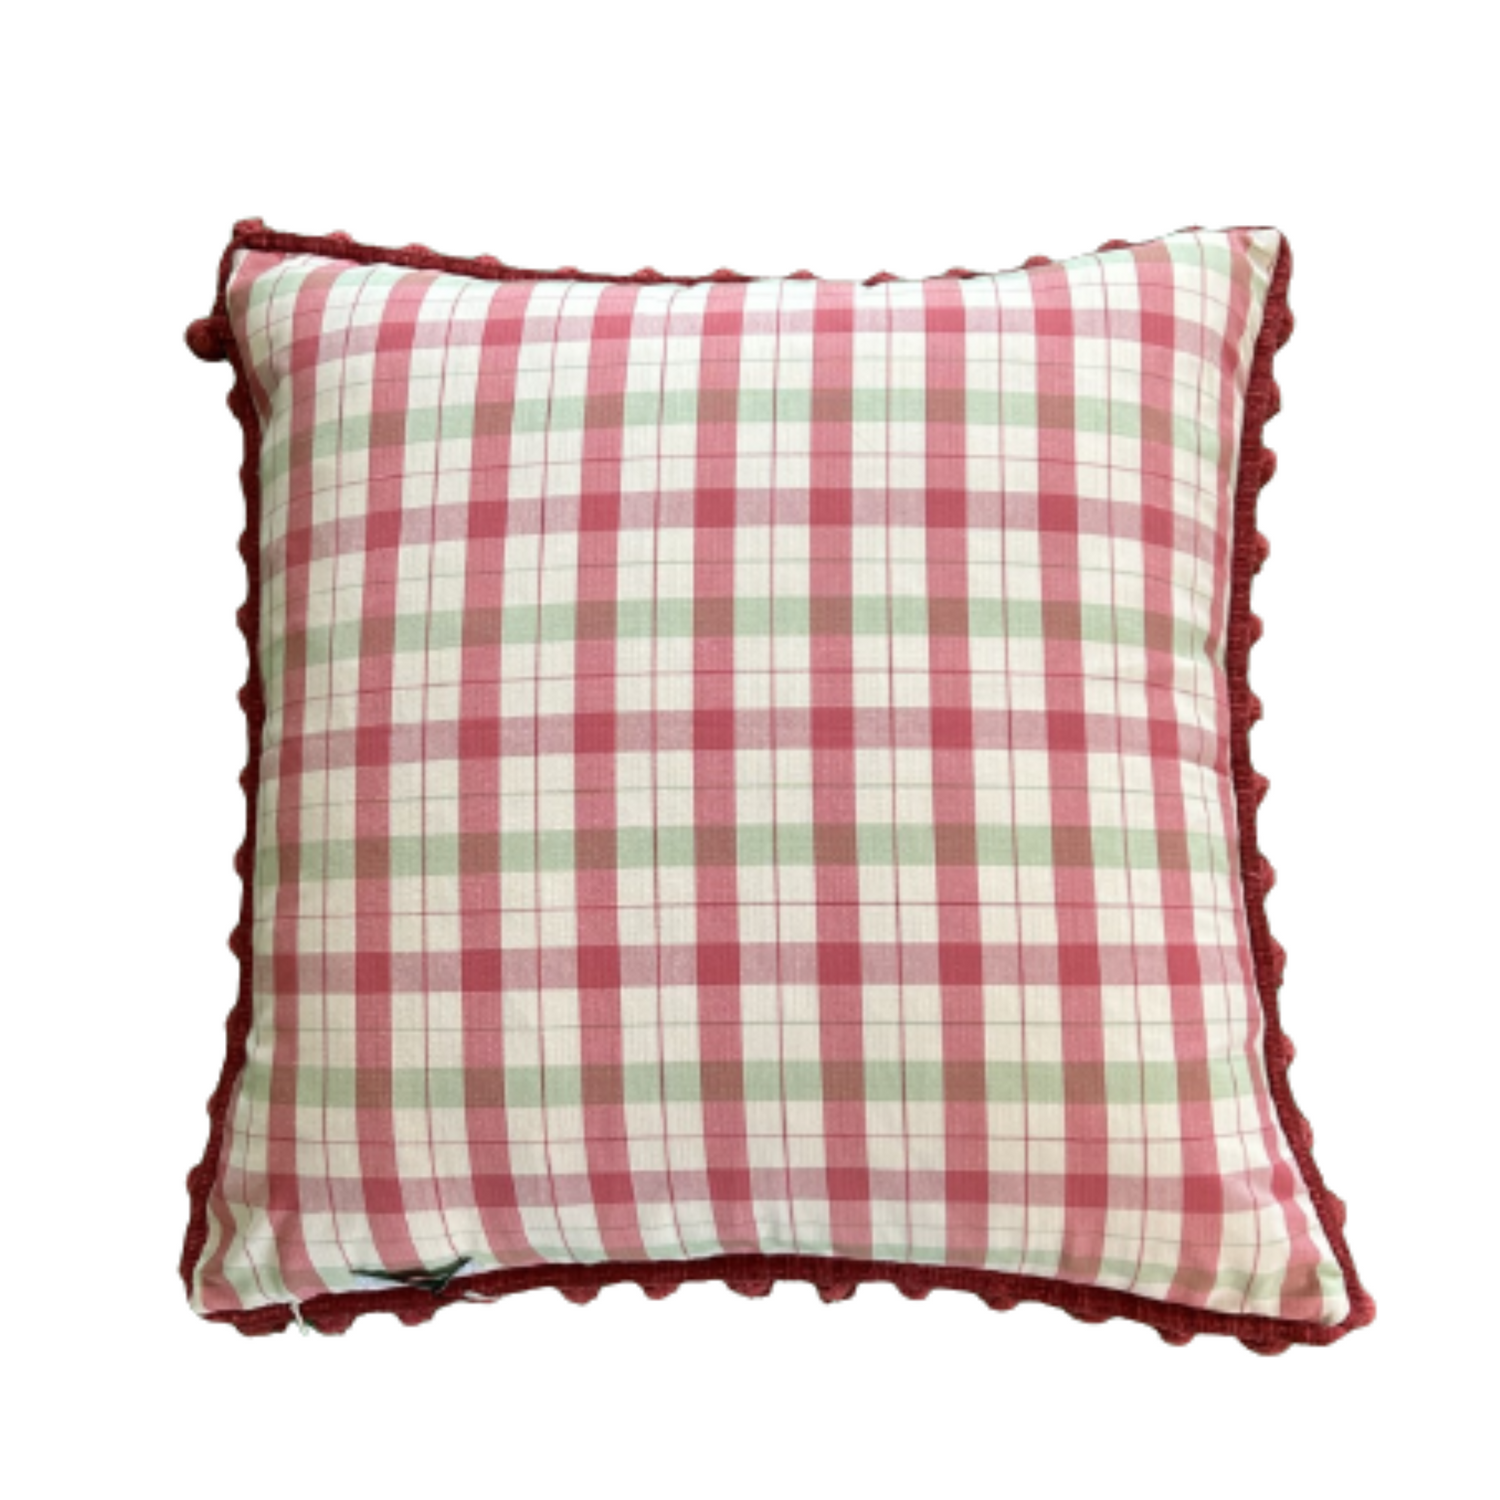 Red Geranium 22 x 22 Inches Decorative Designer Pillow with Down Feather Insert